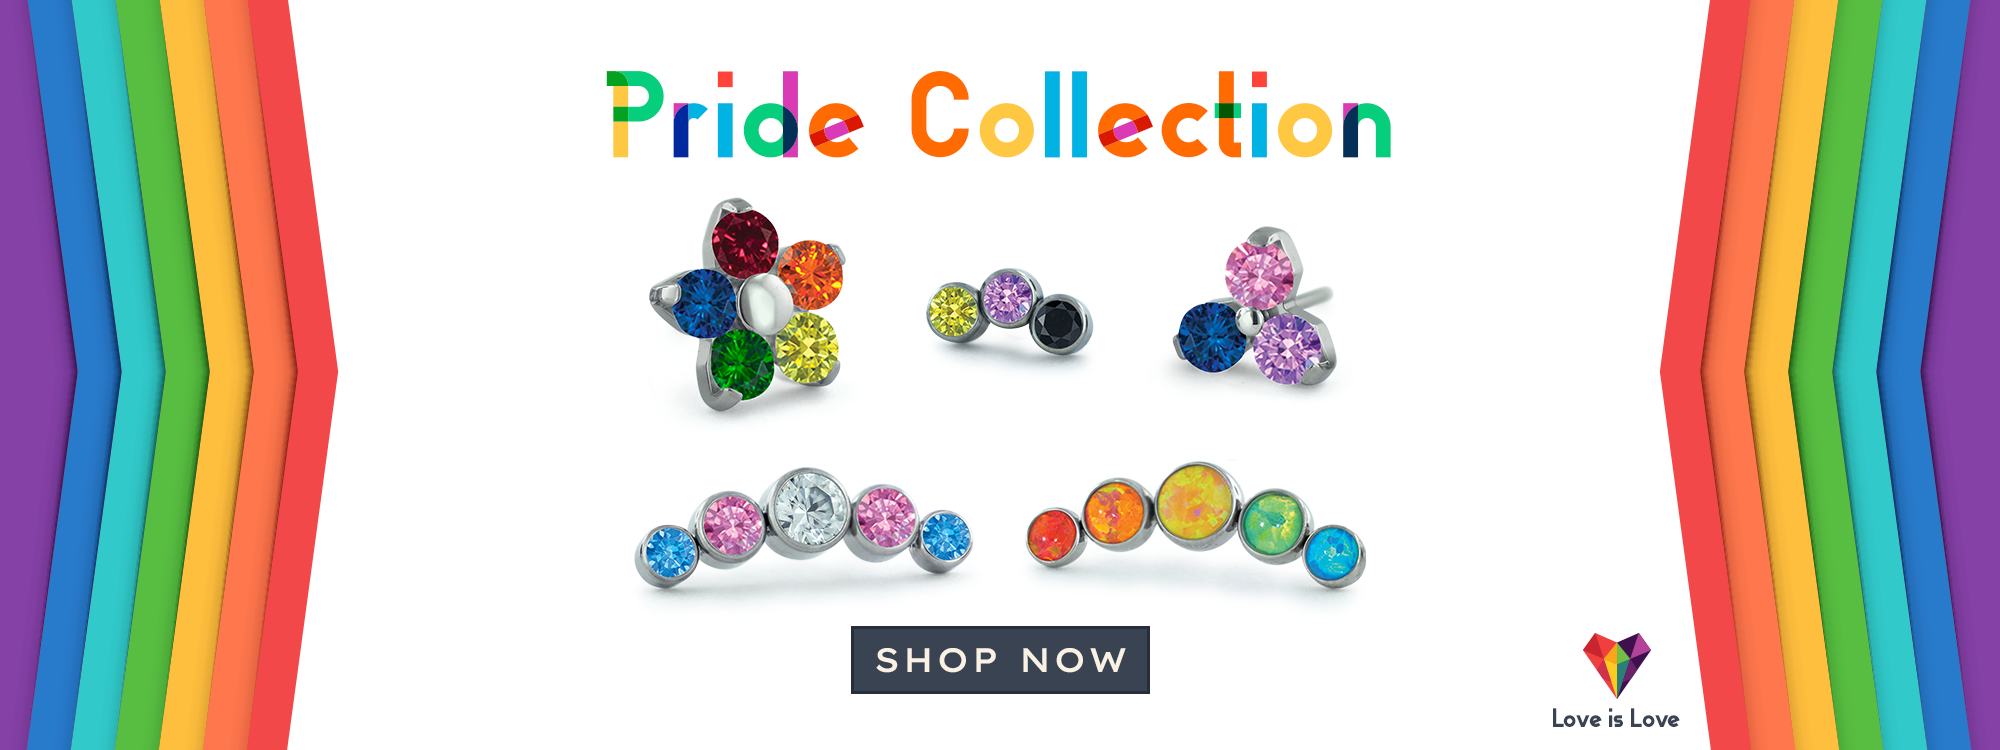 Pride Collection featuring Trinities, Flowers, Curved Clusters, and Petite Clusters in various LGBTQ+ Flag colors